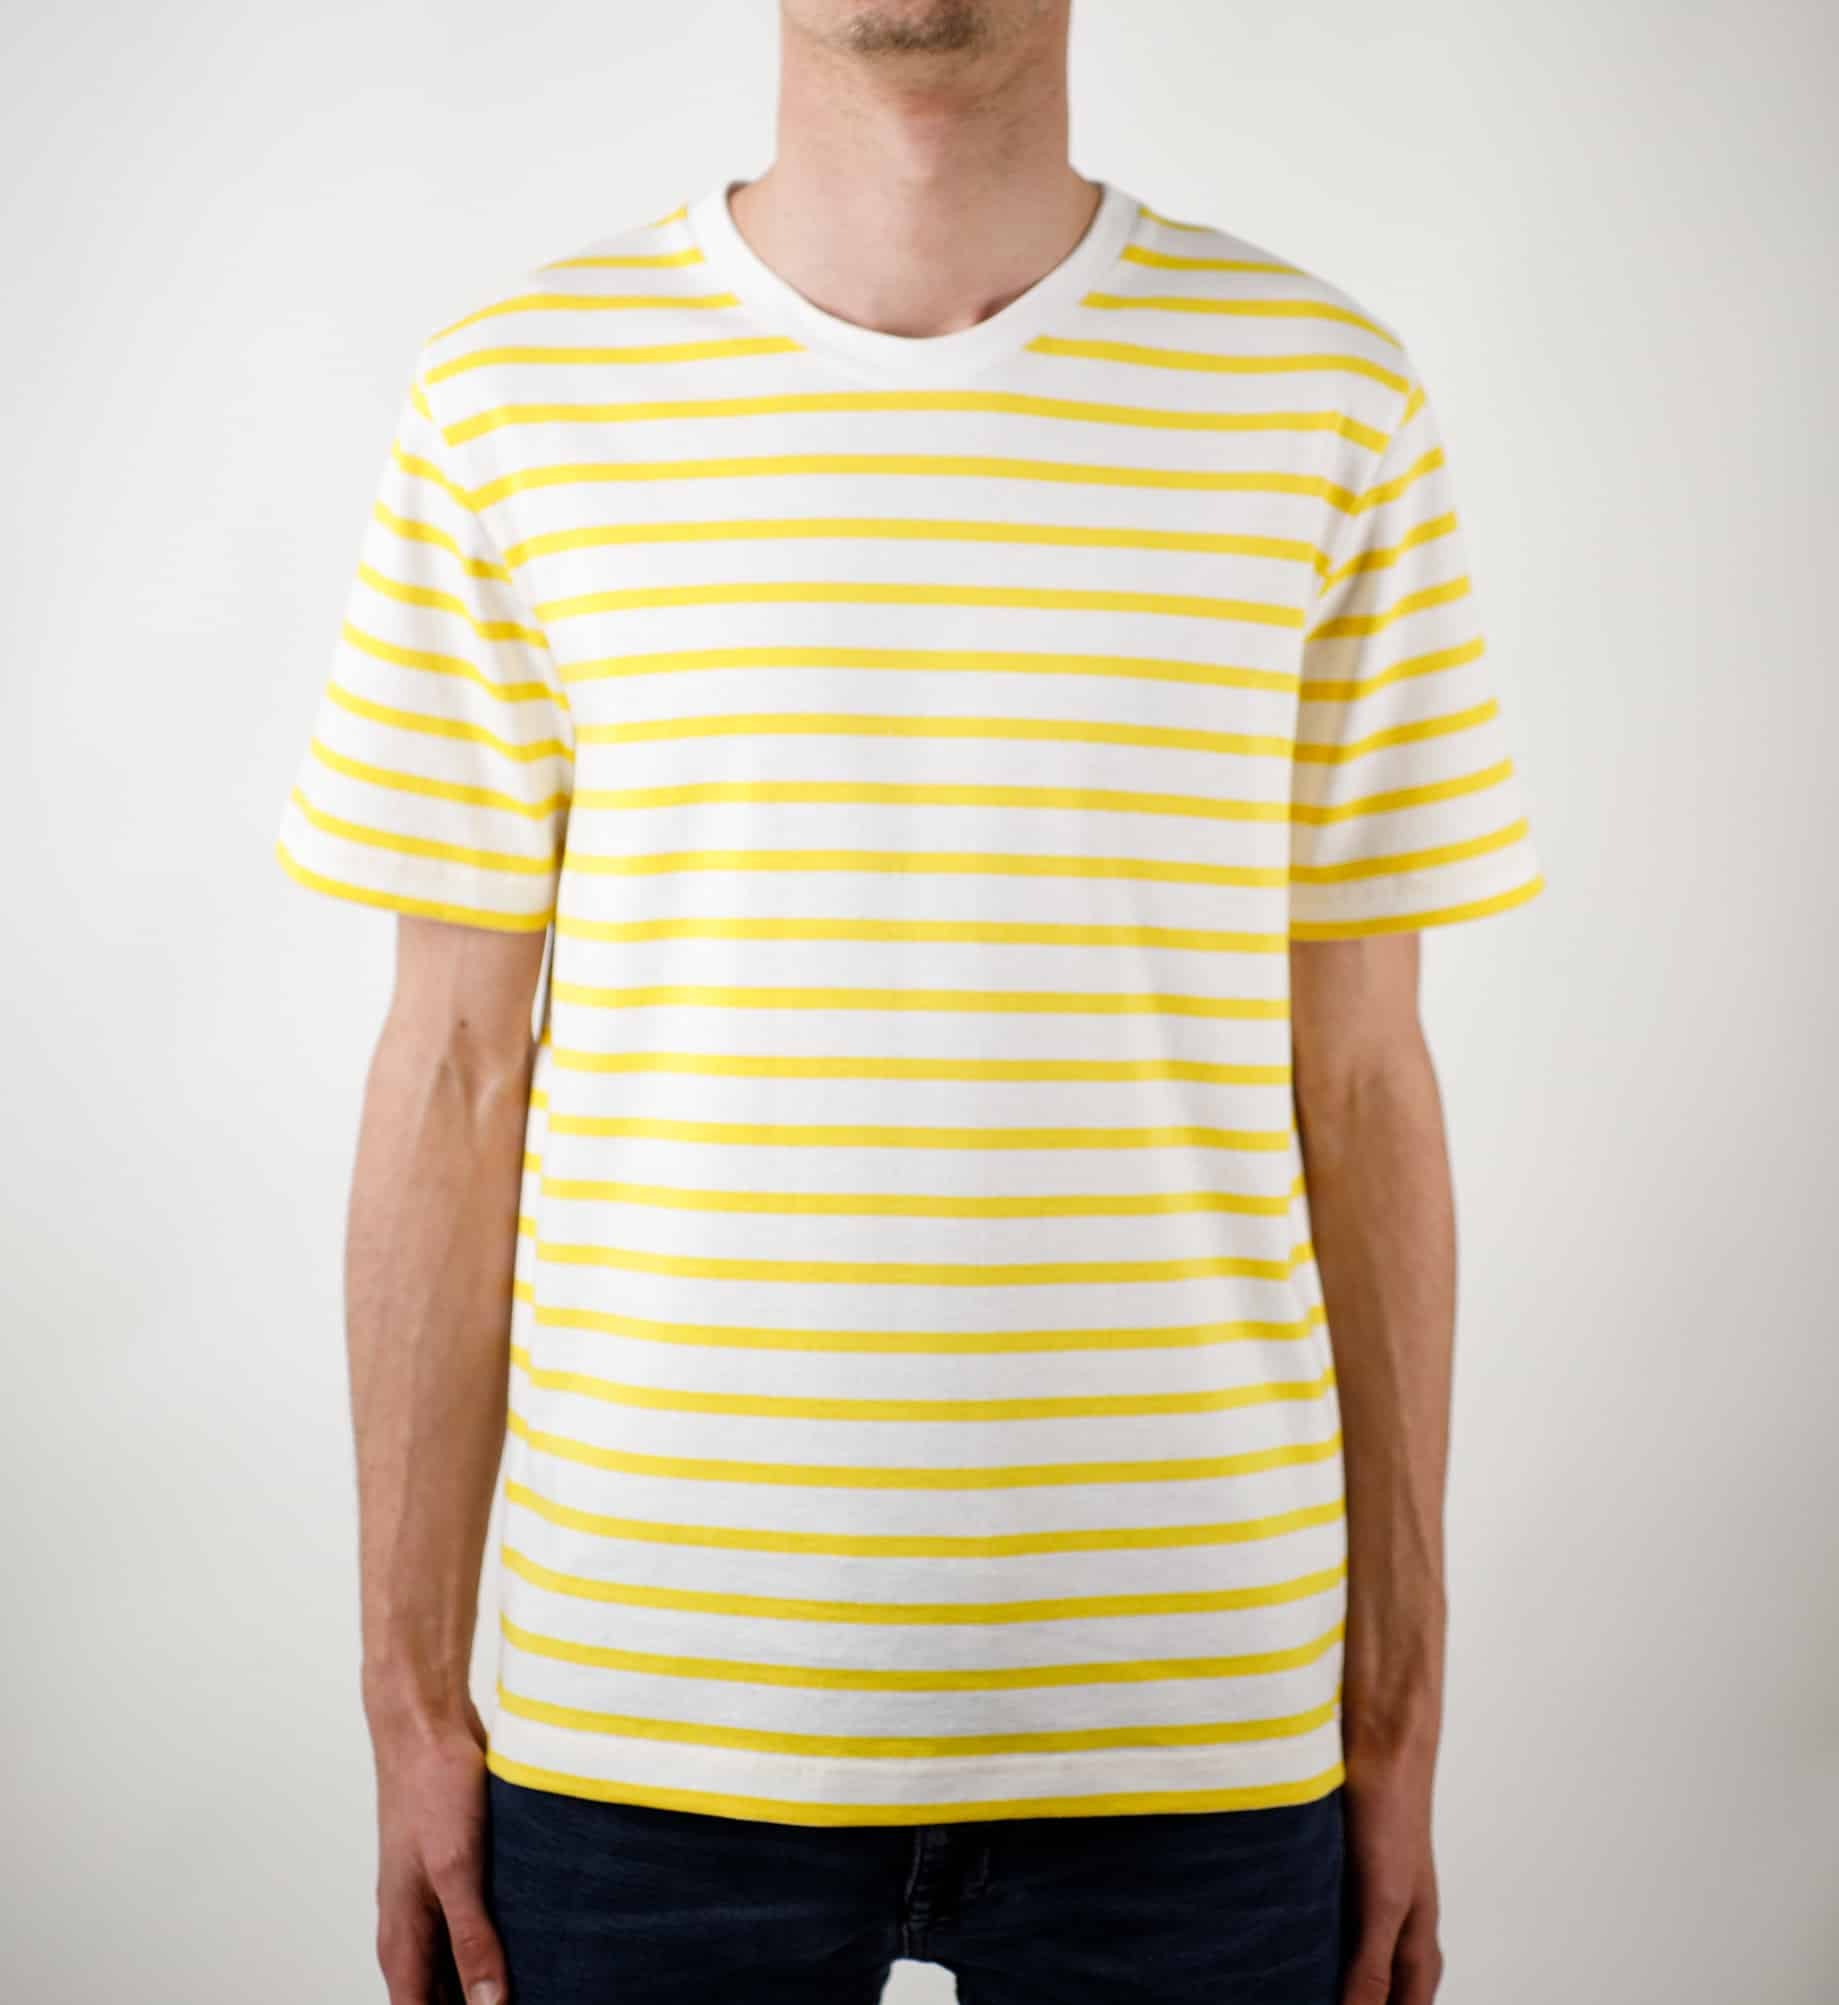 Two-tone striped short-sleeved t-shirt